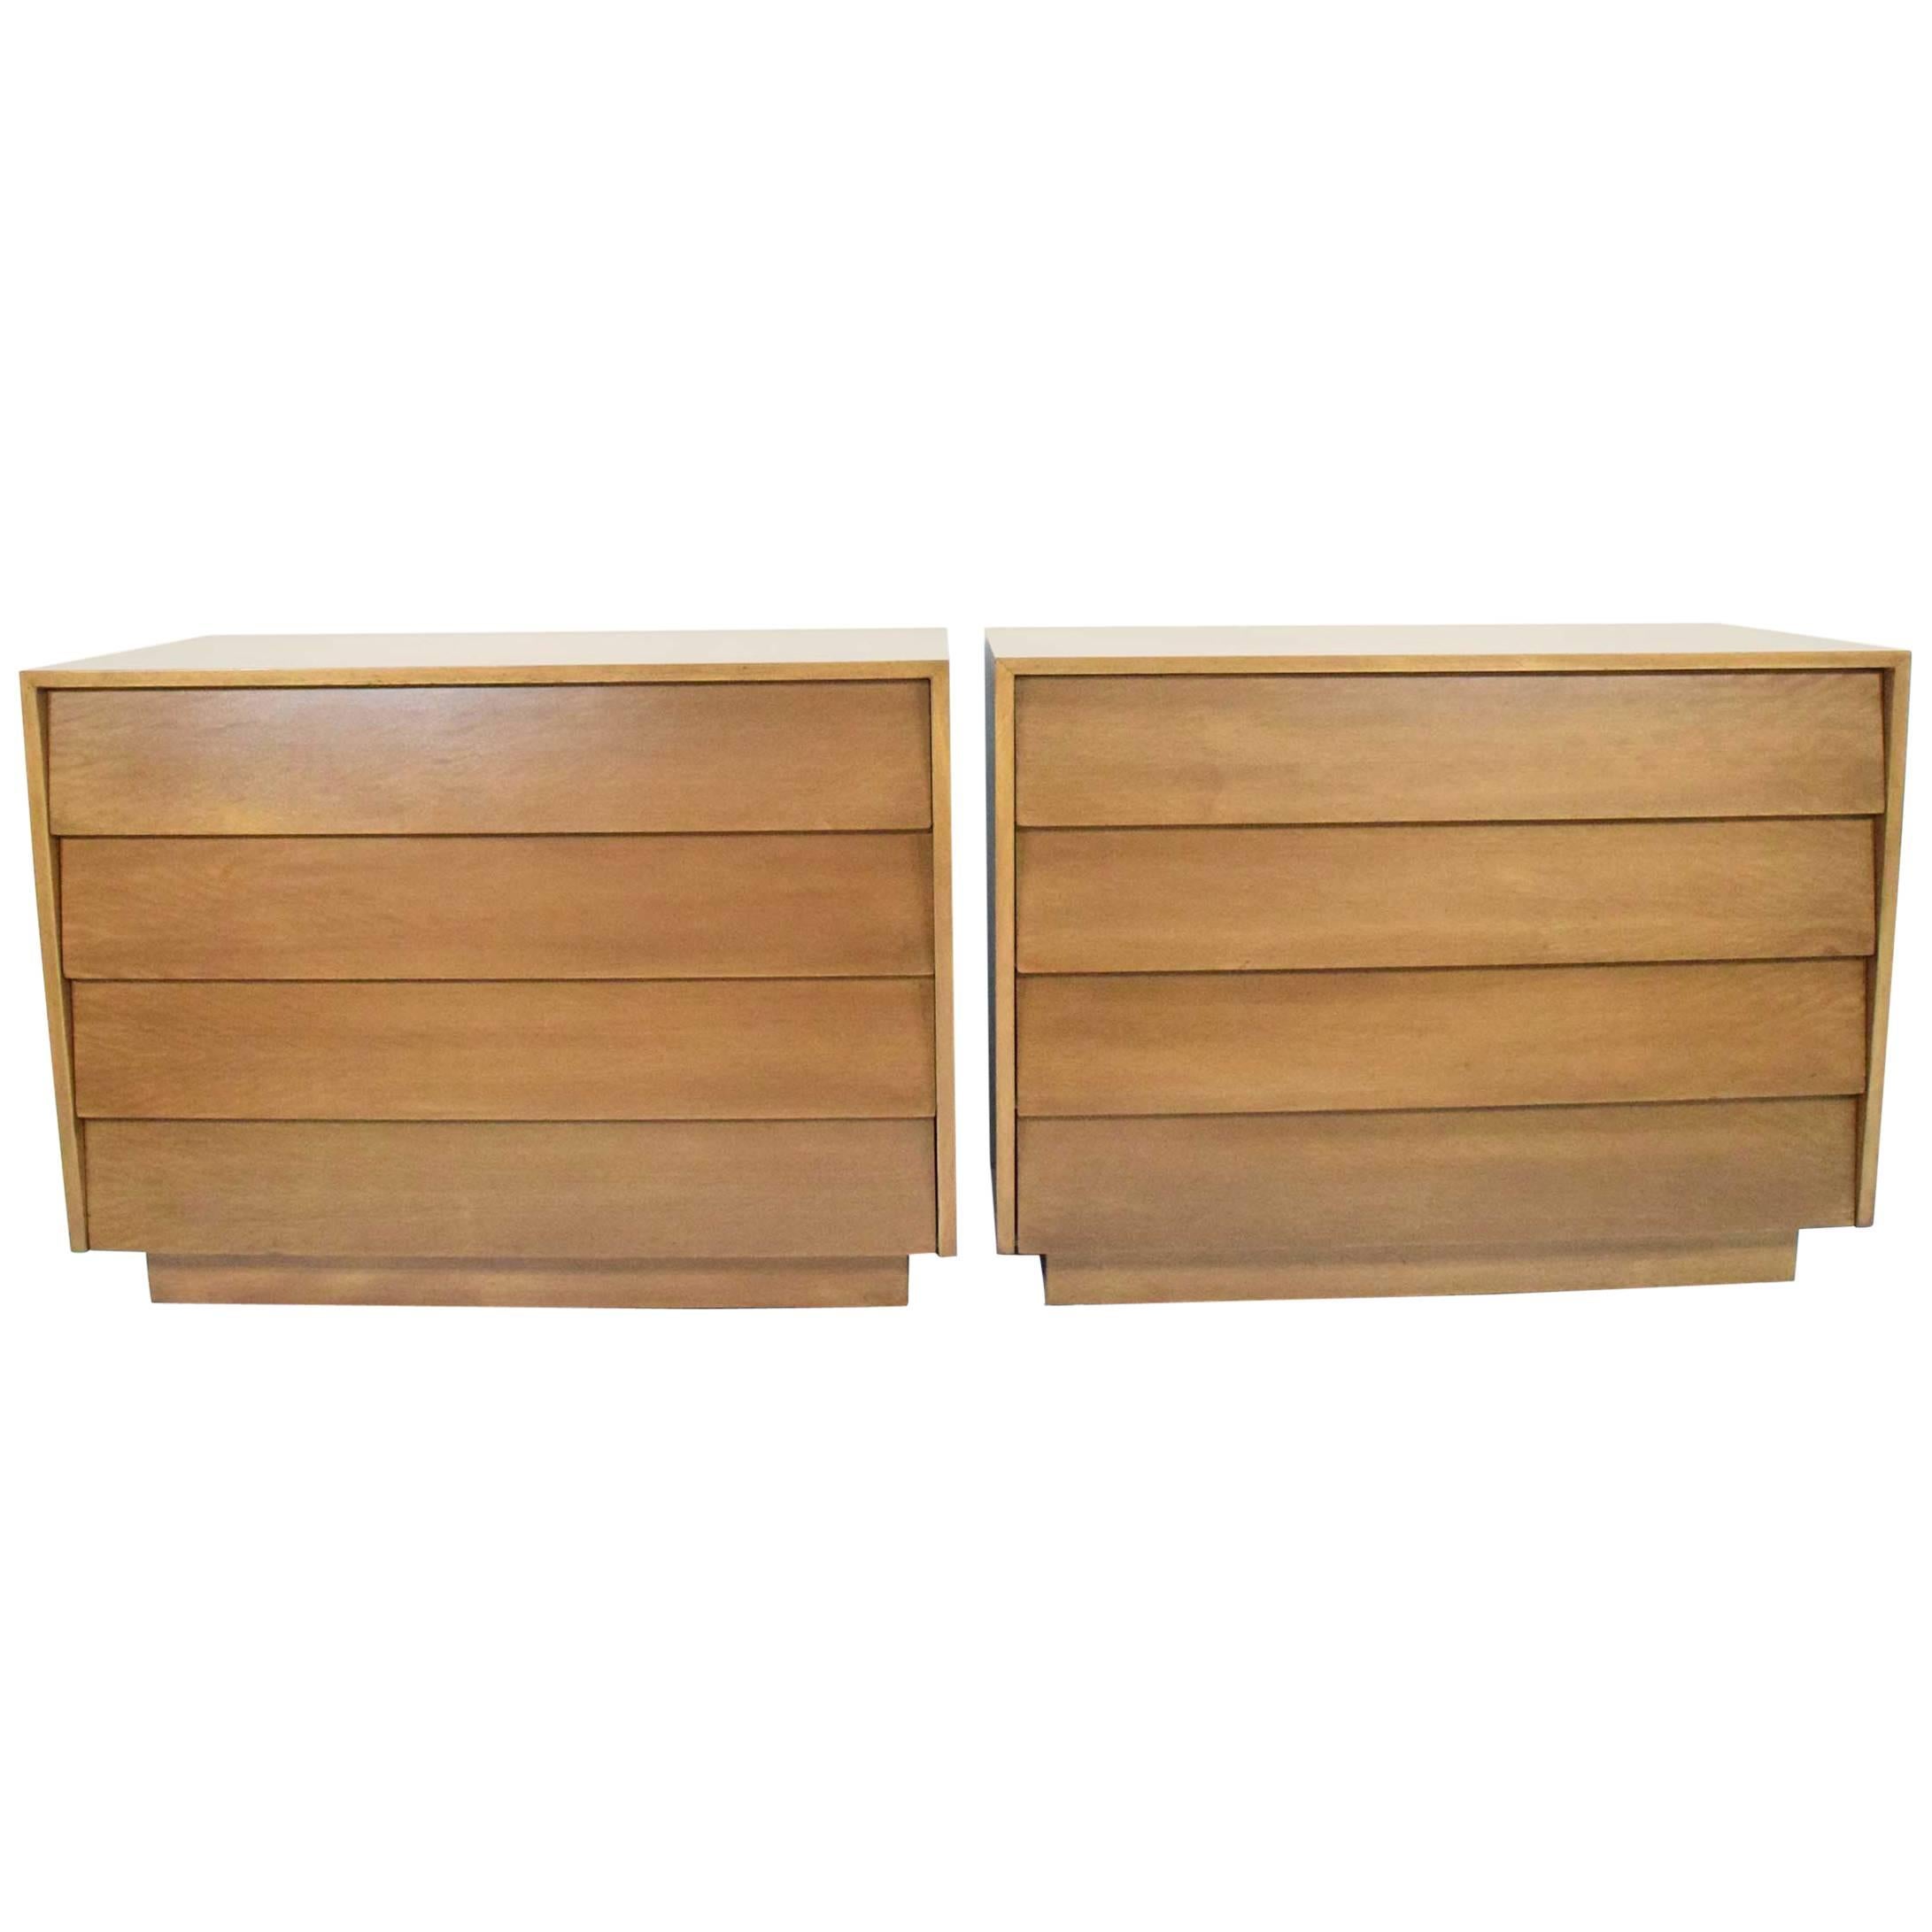 Pair of Louvered Nighstands or Chests after Florence Knoll